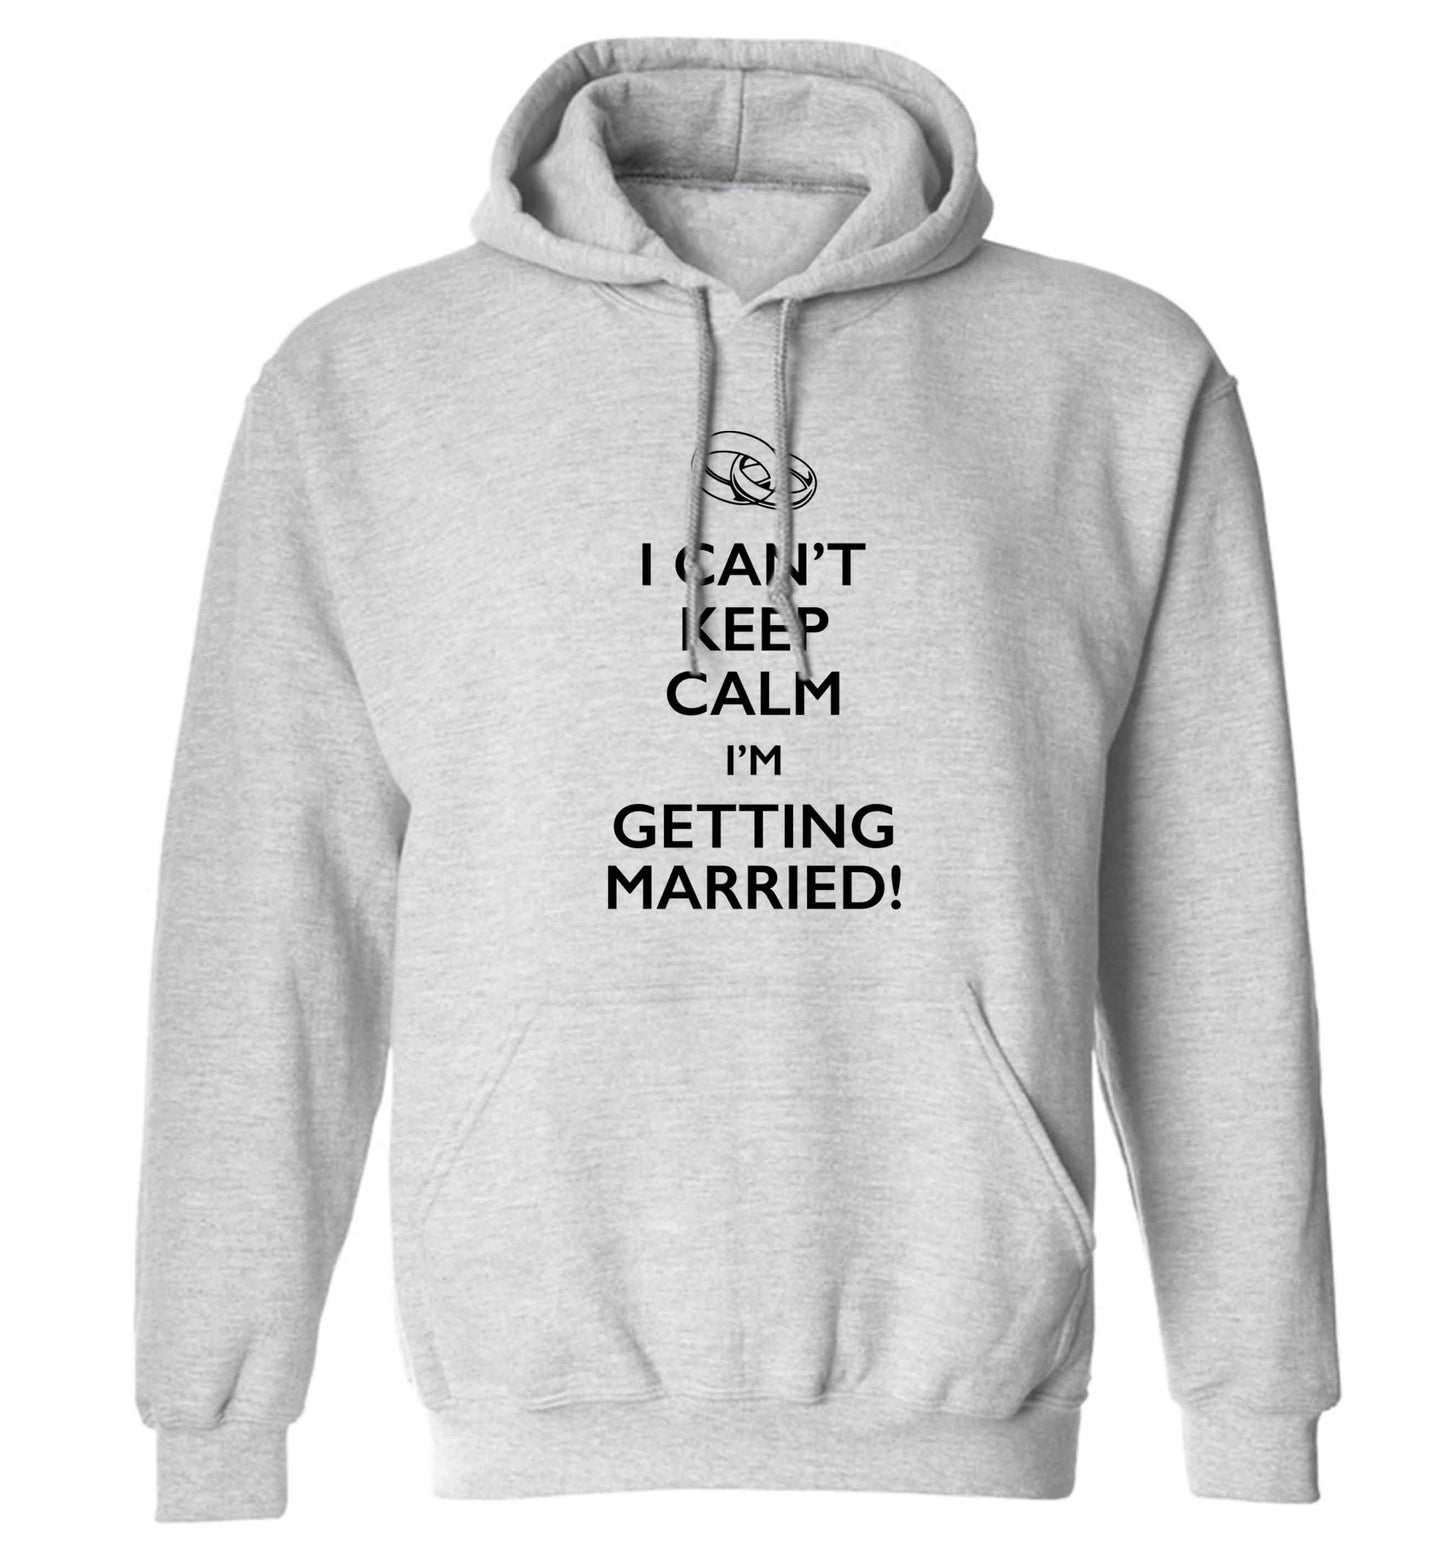 I can't keep calm I'm getting married! adults unisex grey hoodie 2XL